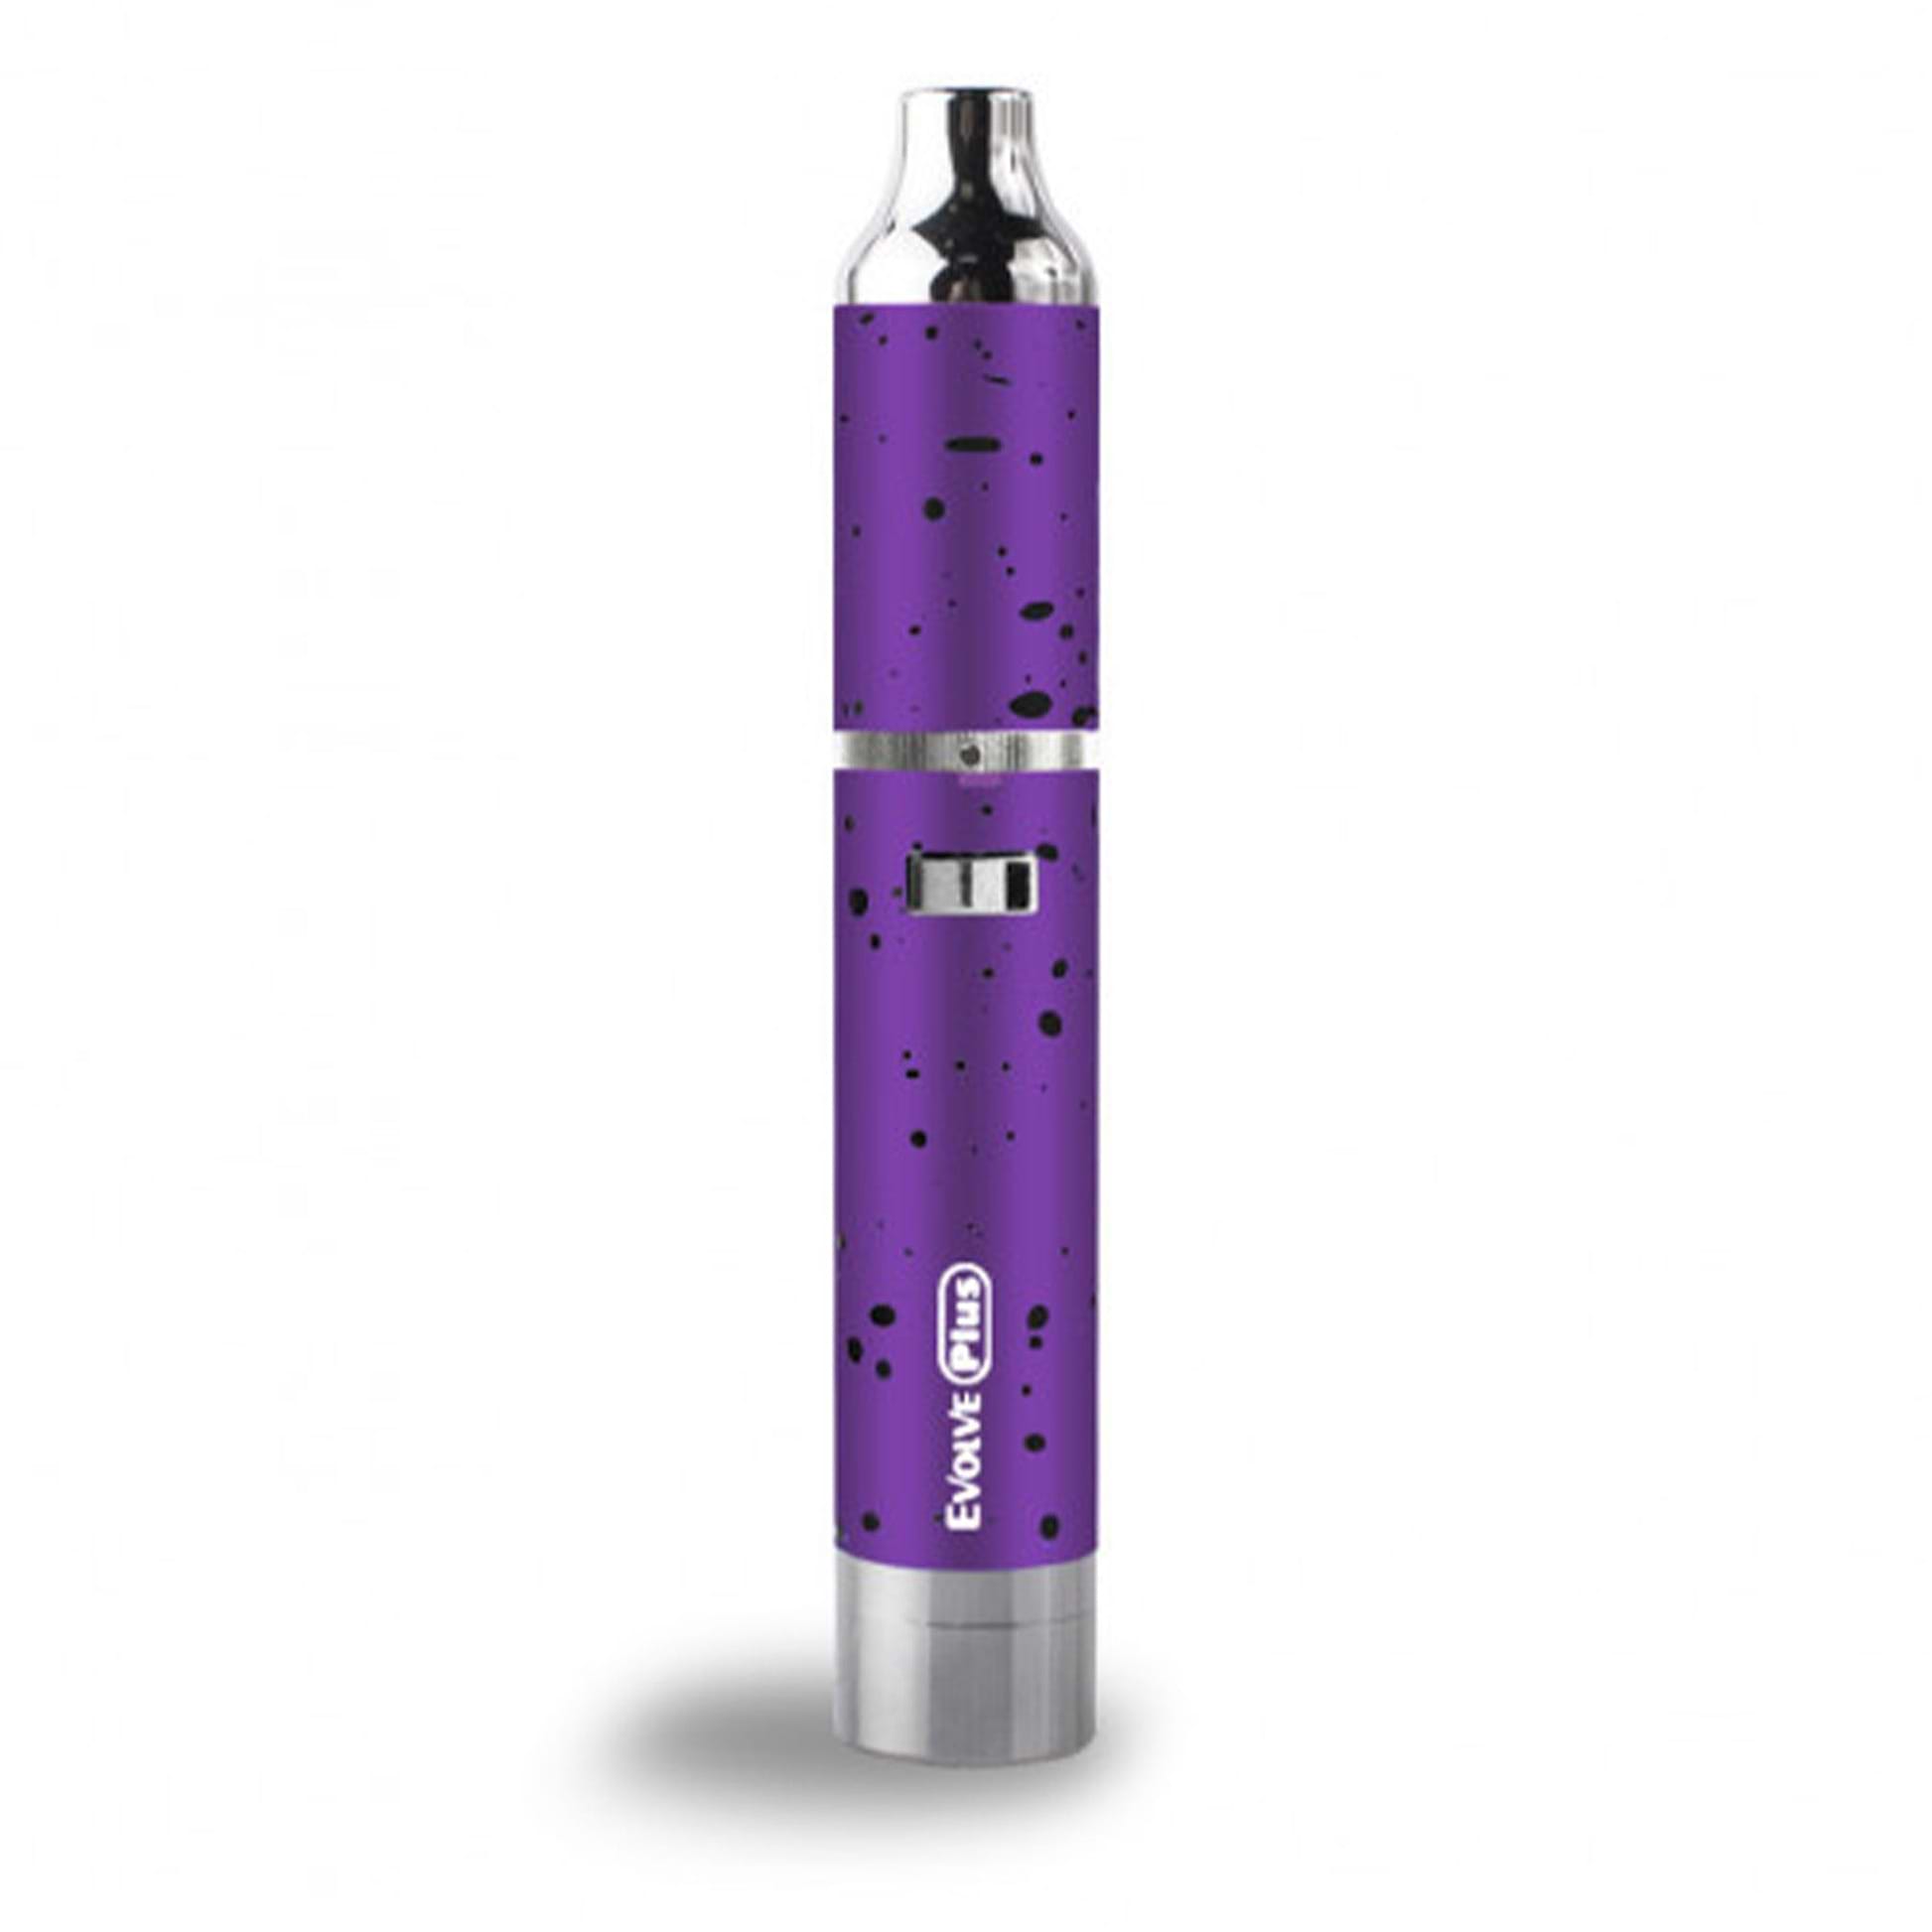 Wulf Evolve Plus Concentrate Vape